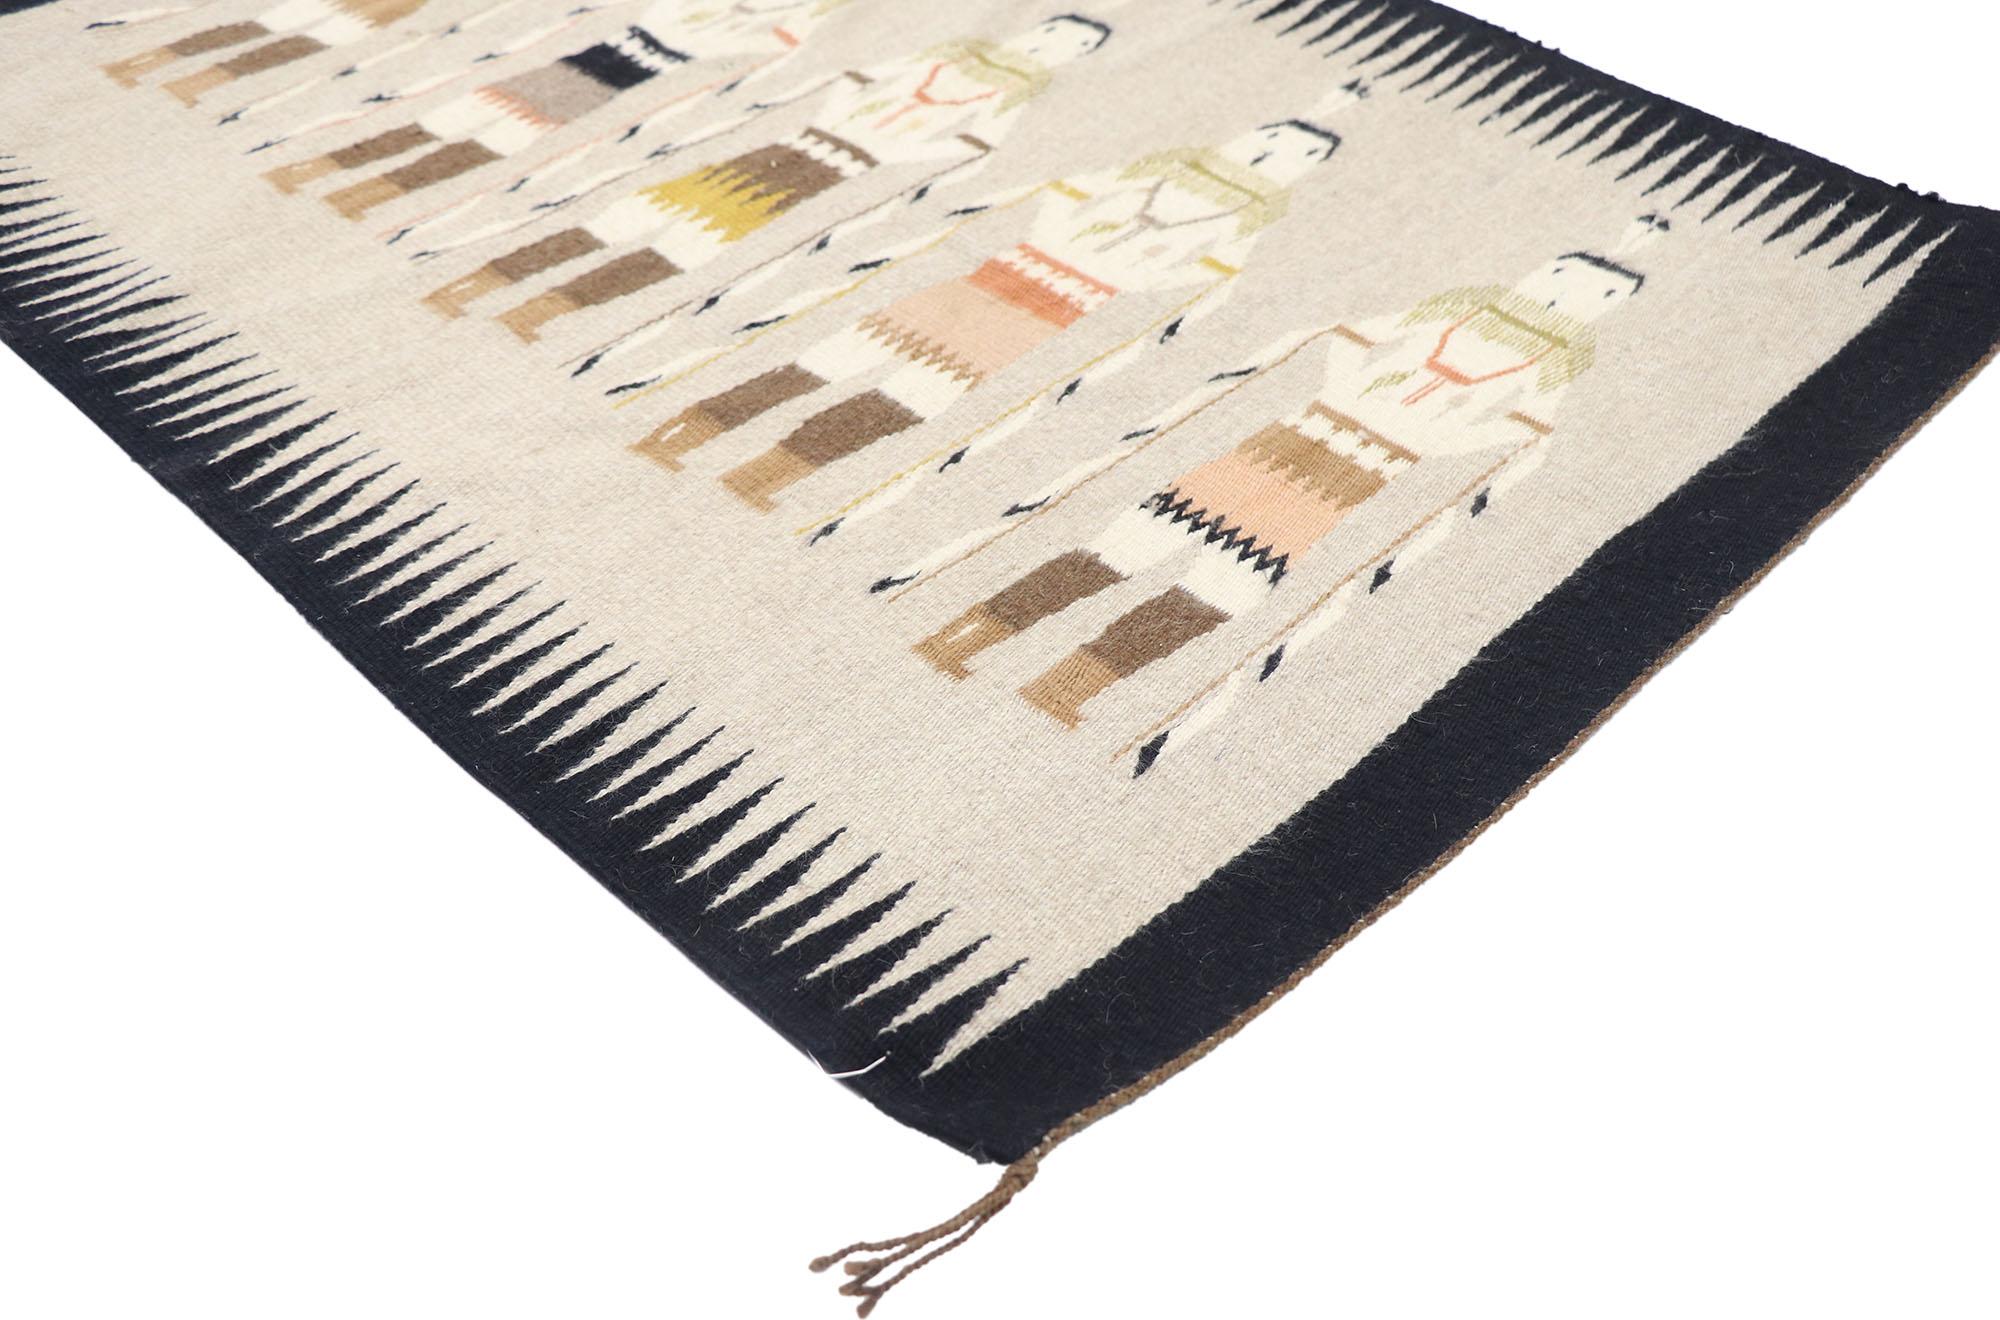 77870 Vintage Navajo Kilim Yeibichai rug with Southwestern Folk Art Style 02'05 x 03'04. Full of tiny details and a bold expressive design combined with neutral colors and tribal style, this hand-woven wool vintage Navajo kilim Yeibichai rug is a